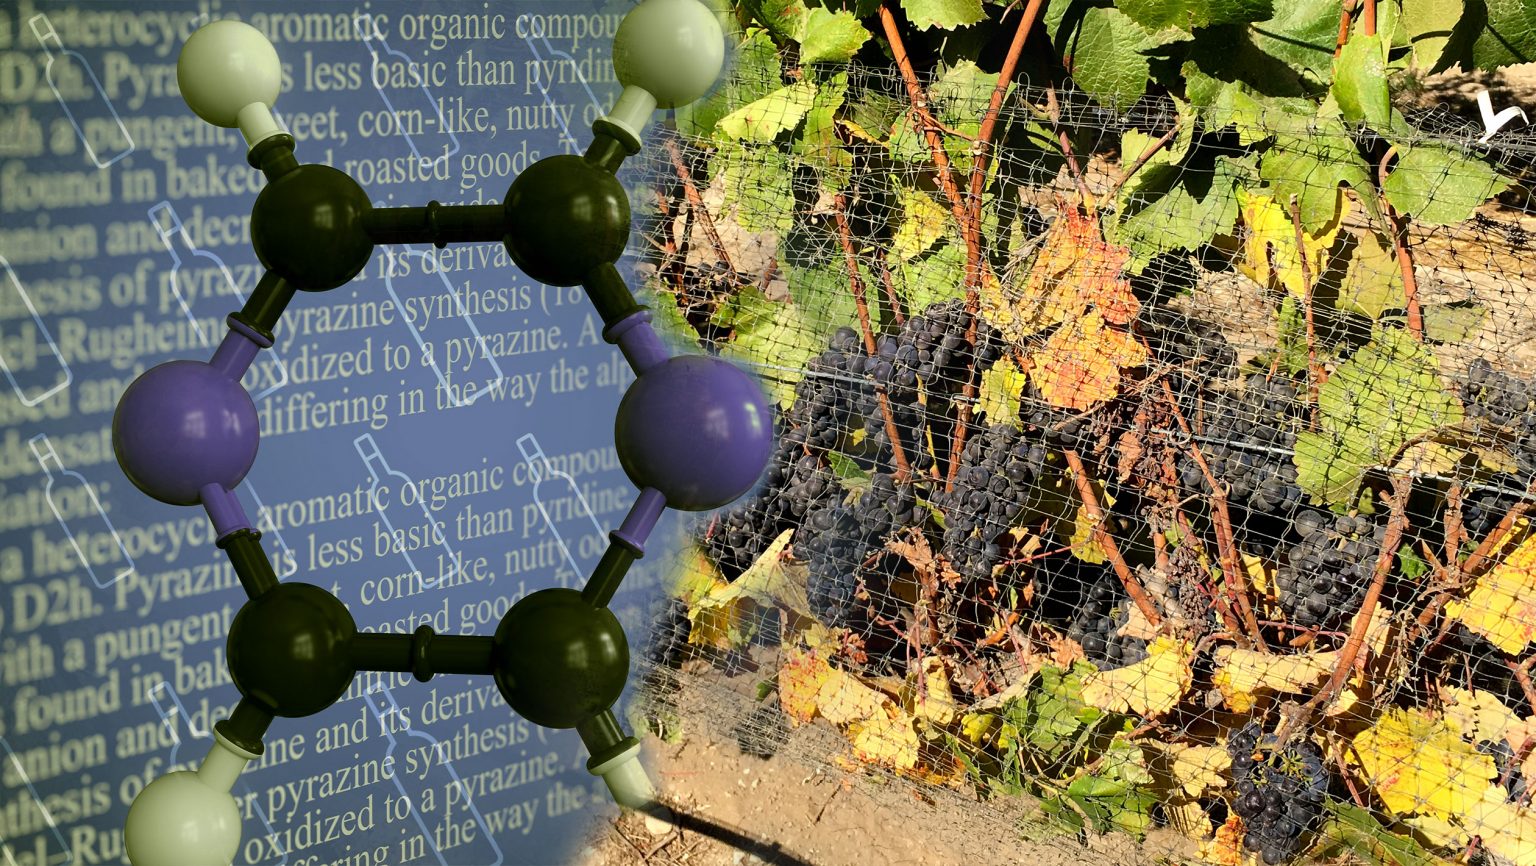 Methoxypyrazines are present in the well-known Bordeaux family of grapes, but viticulture and vinification impact pyrazine levels in finished wines. Photos by Adobe Stock and Alex Russan.